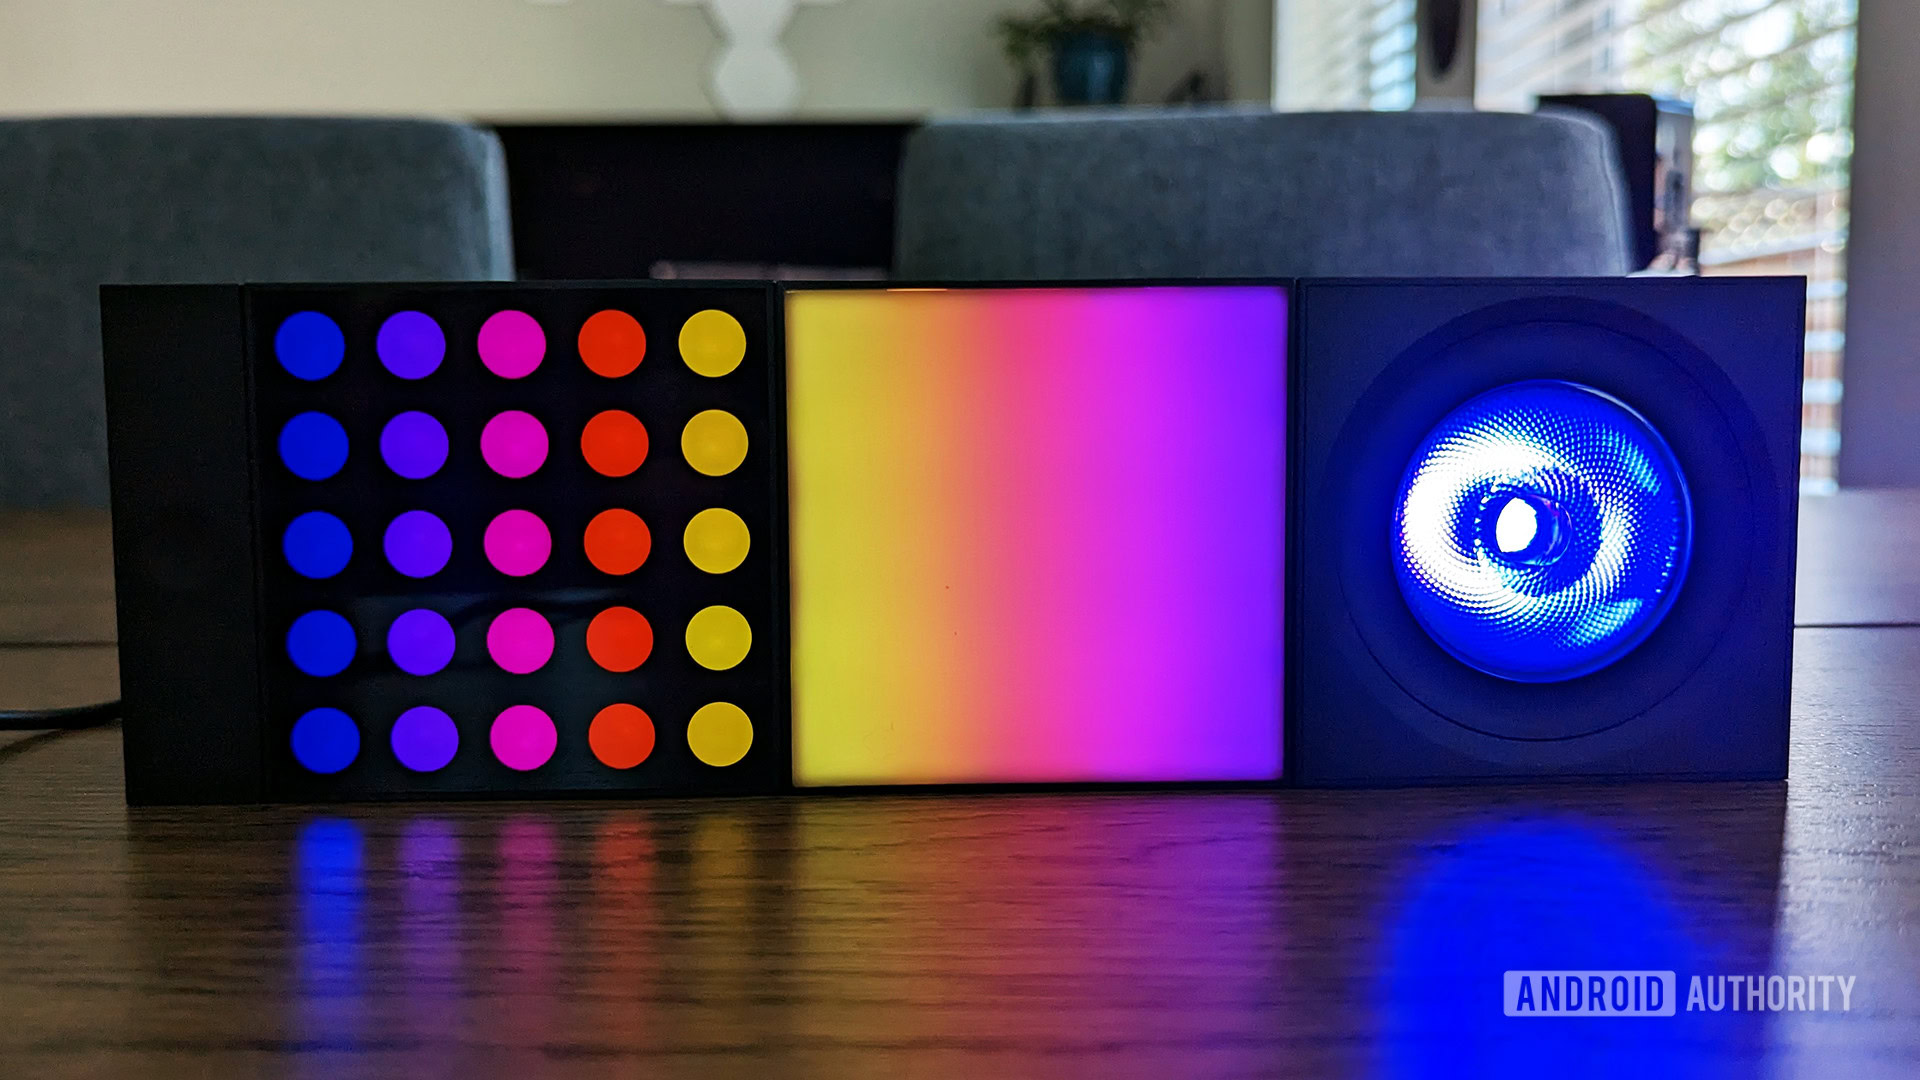 Yeelight Cube is a cool stackable smart lamp with Matter support